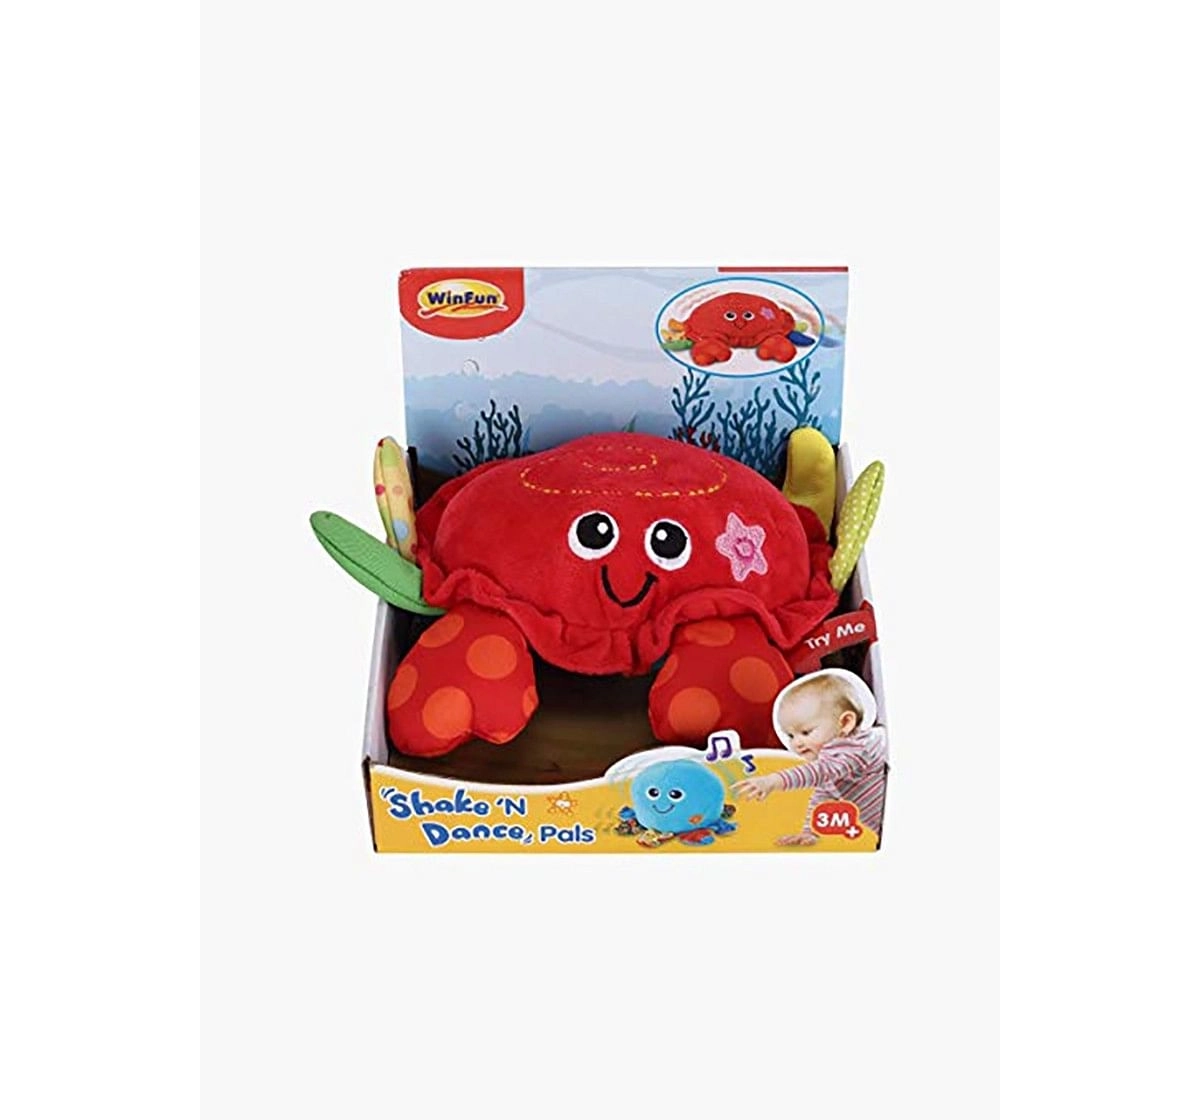 Winfun Shake N Dance Pals - Crab Early Learner Toys for Kids age 3M+ (Red)